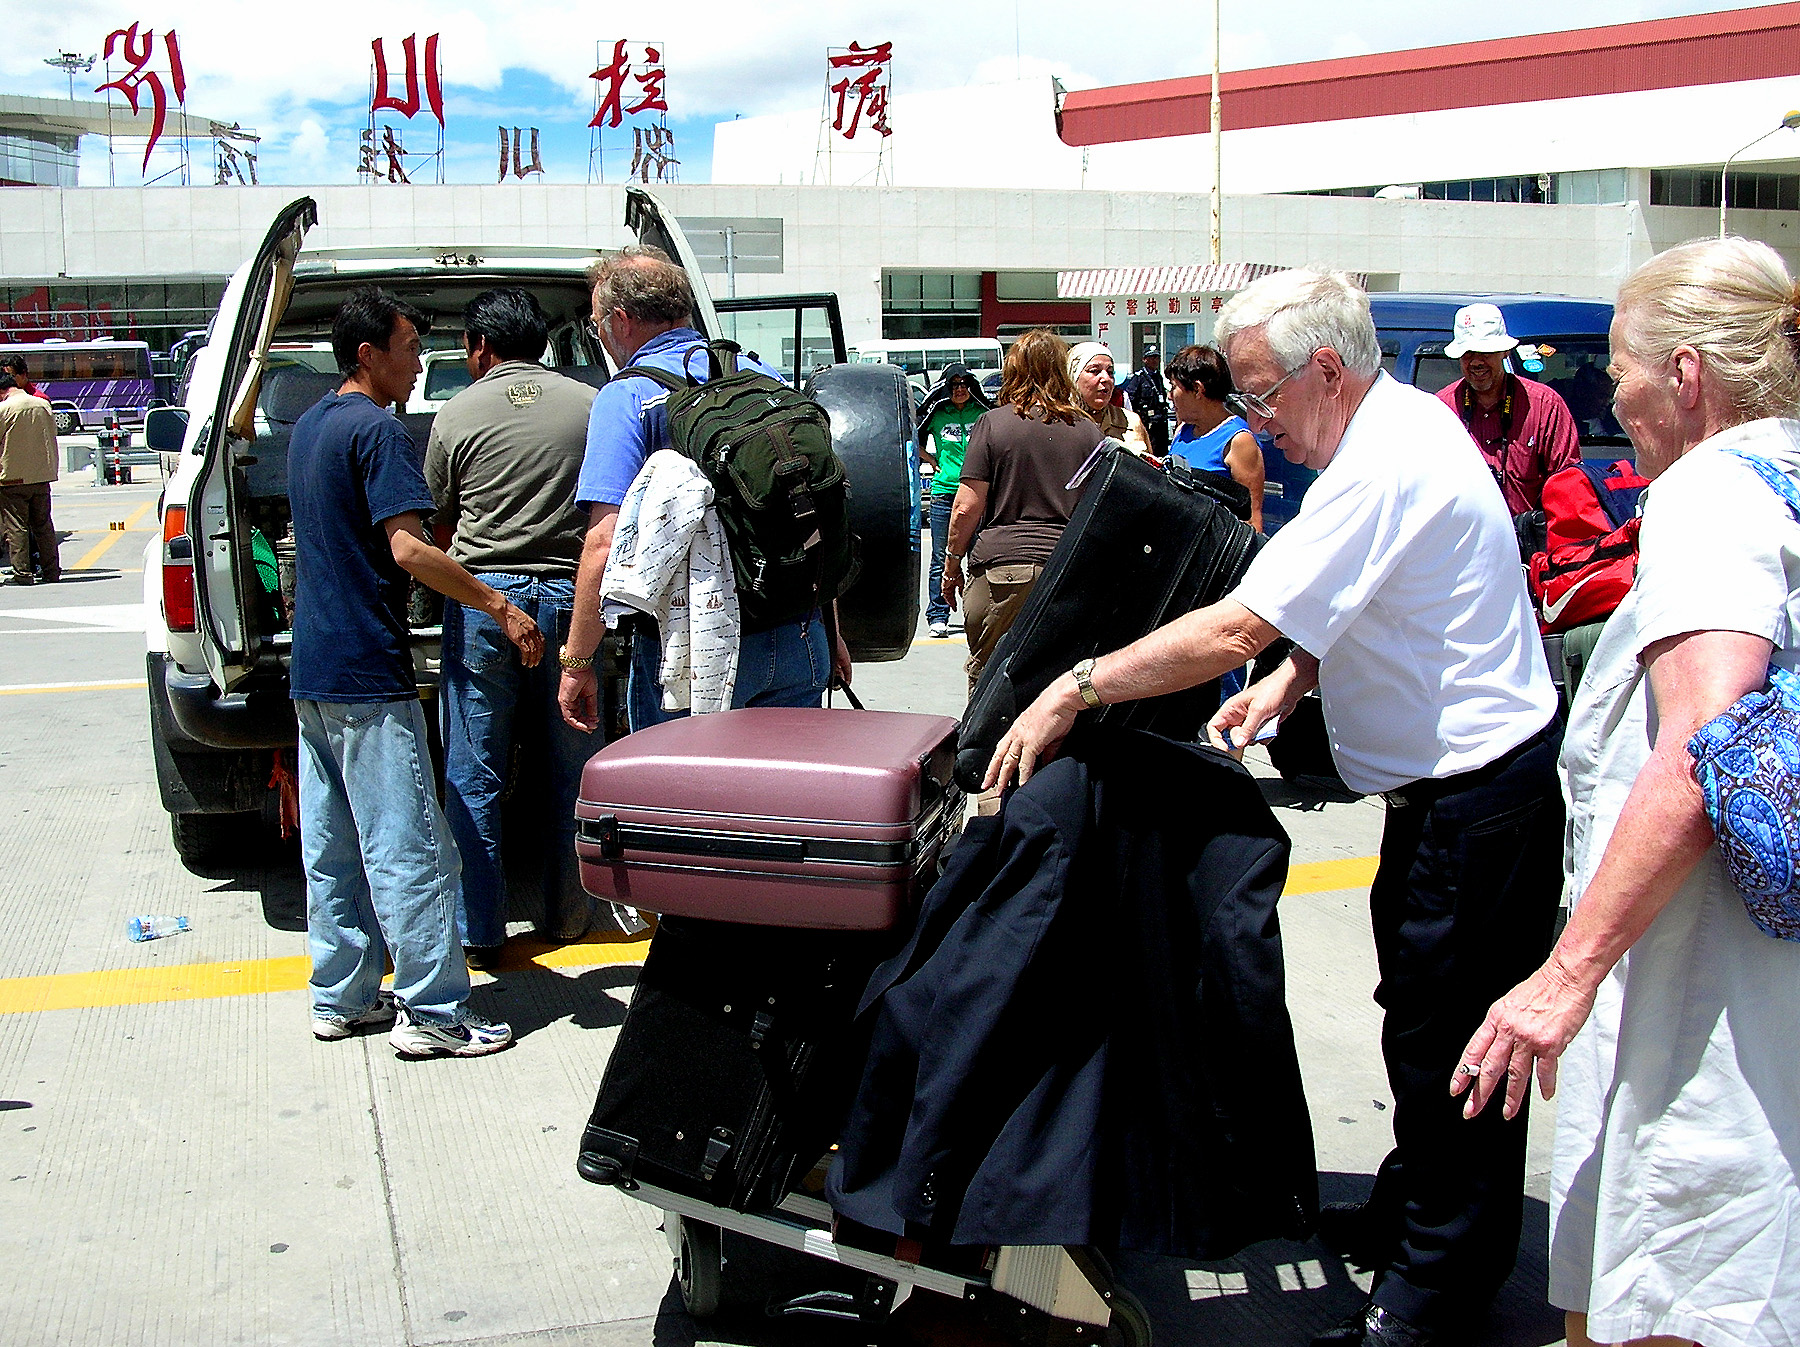 Eclipse 2008 - A22 - Boarding the Himalaya Train in Lhasa